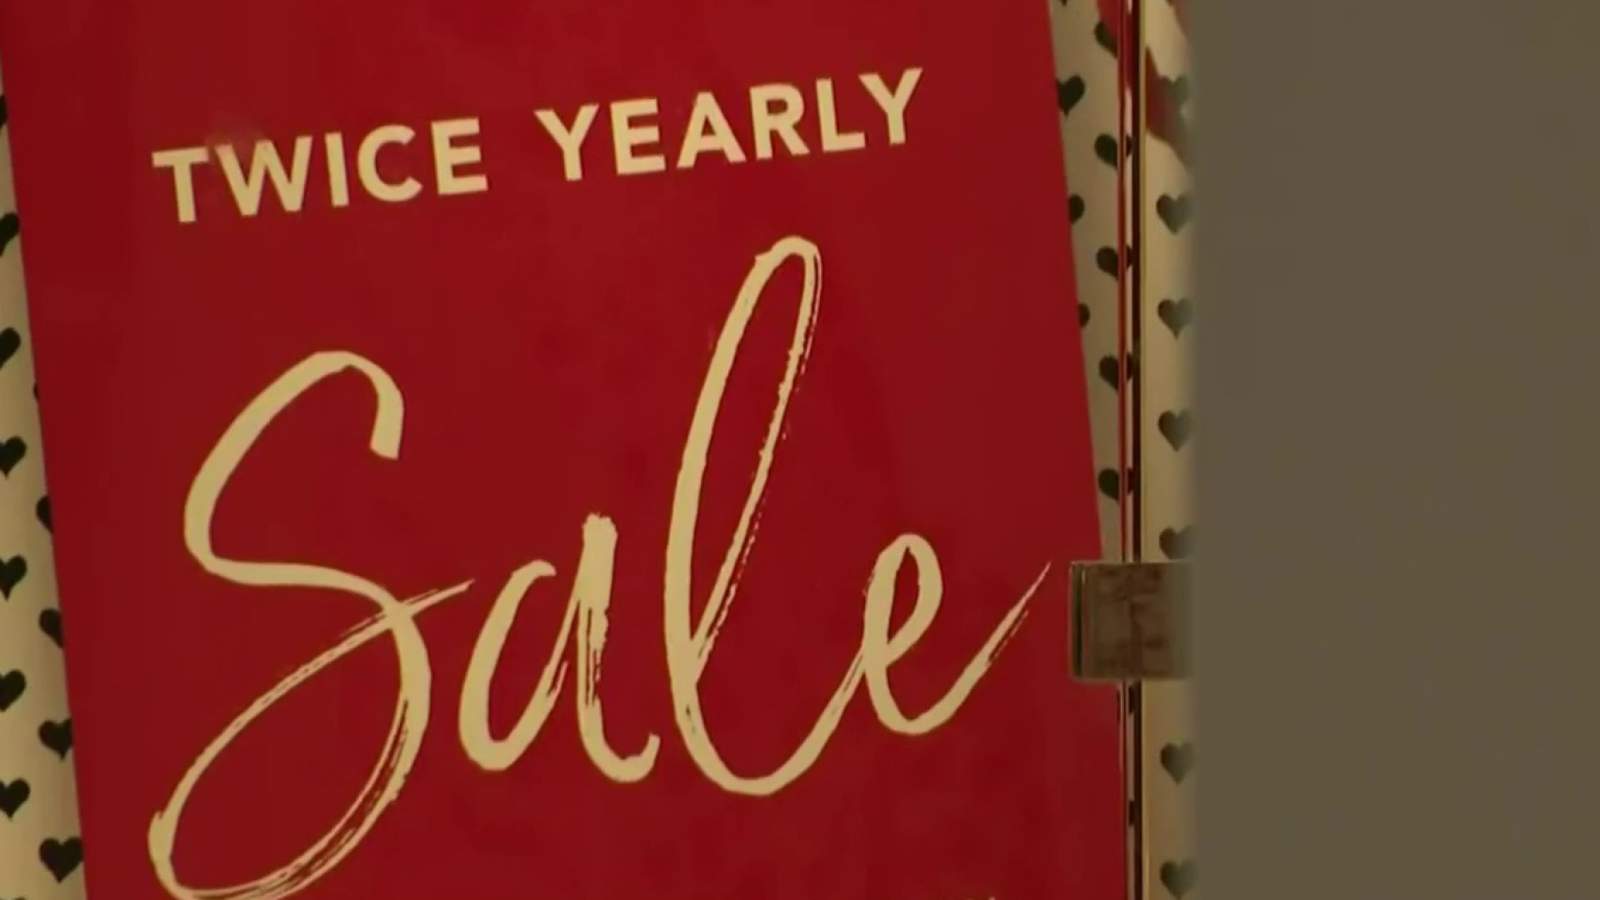 Shoppers pack Metro Detroit malls to return gifts, find post-Christmas deals